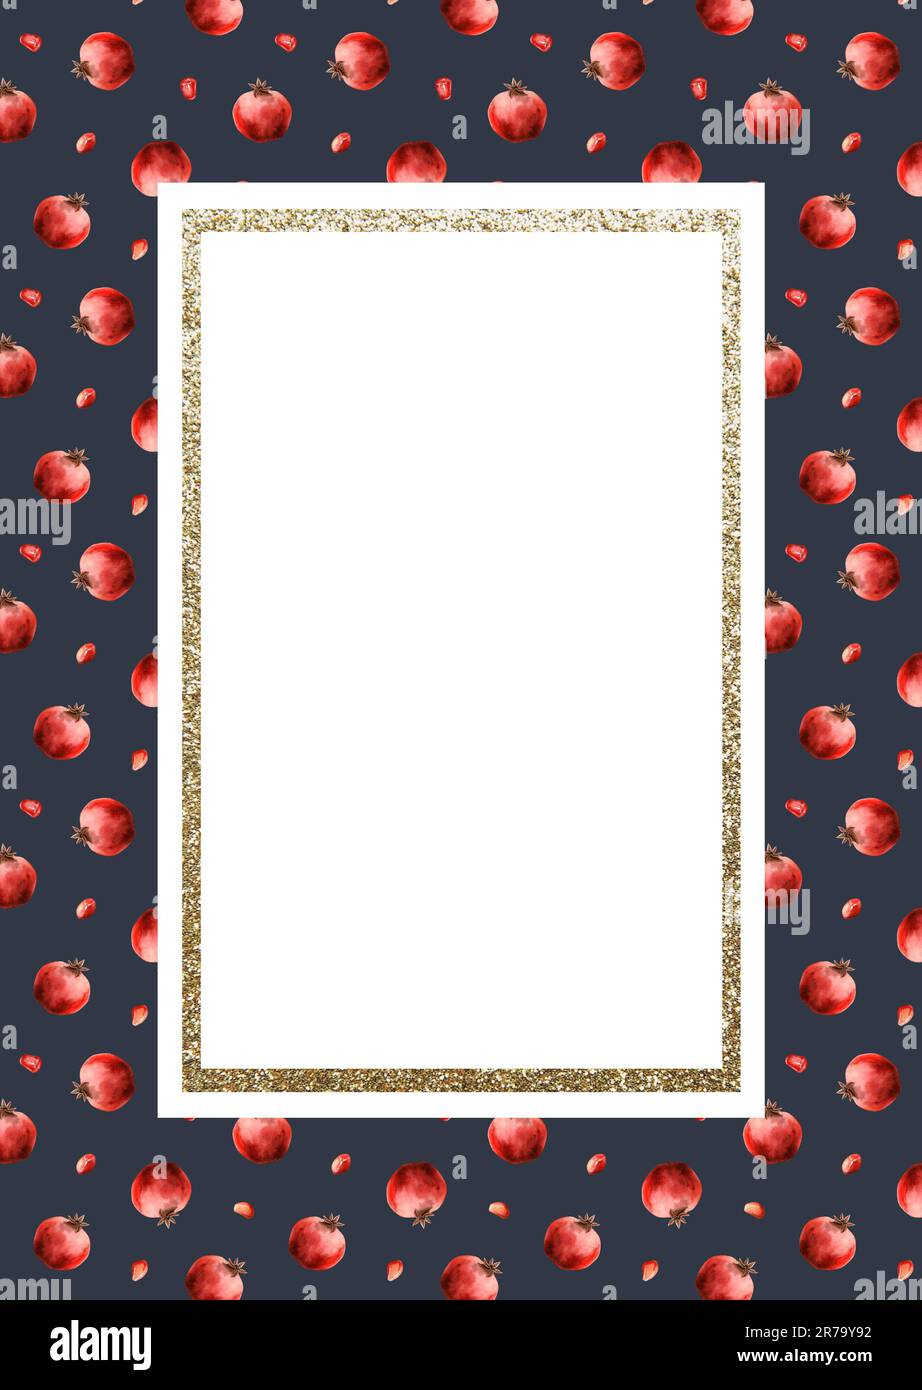 Dark blue and red pomegranate fruits greeting card template watercolor illustration with golden frame and copyspace Stock Photo